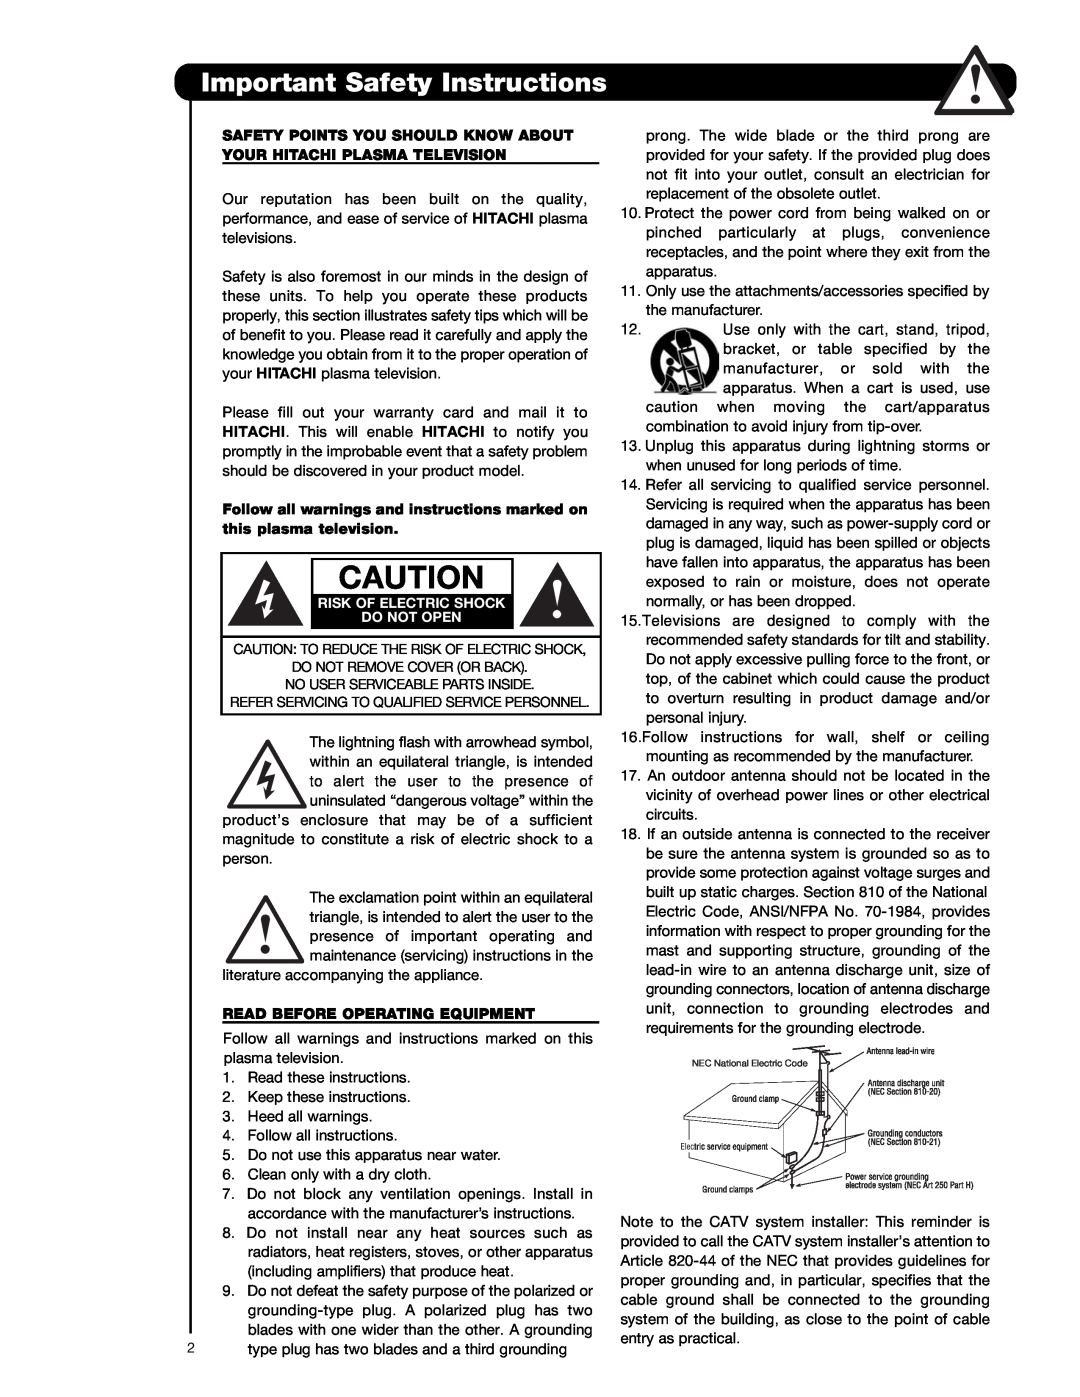 Hitachi P50T501, P42T501 Important Safety Instructions, Safety Points You Should Know About Your Hitachi Plasma Television 